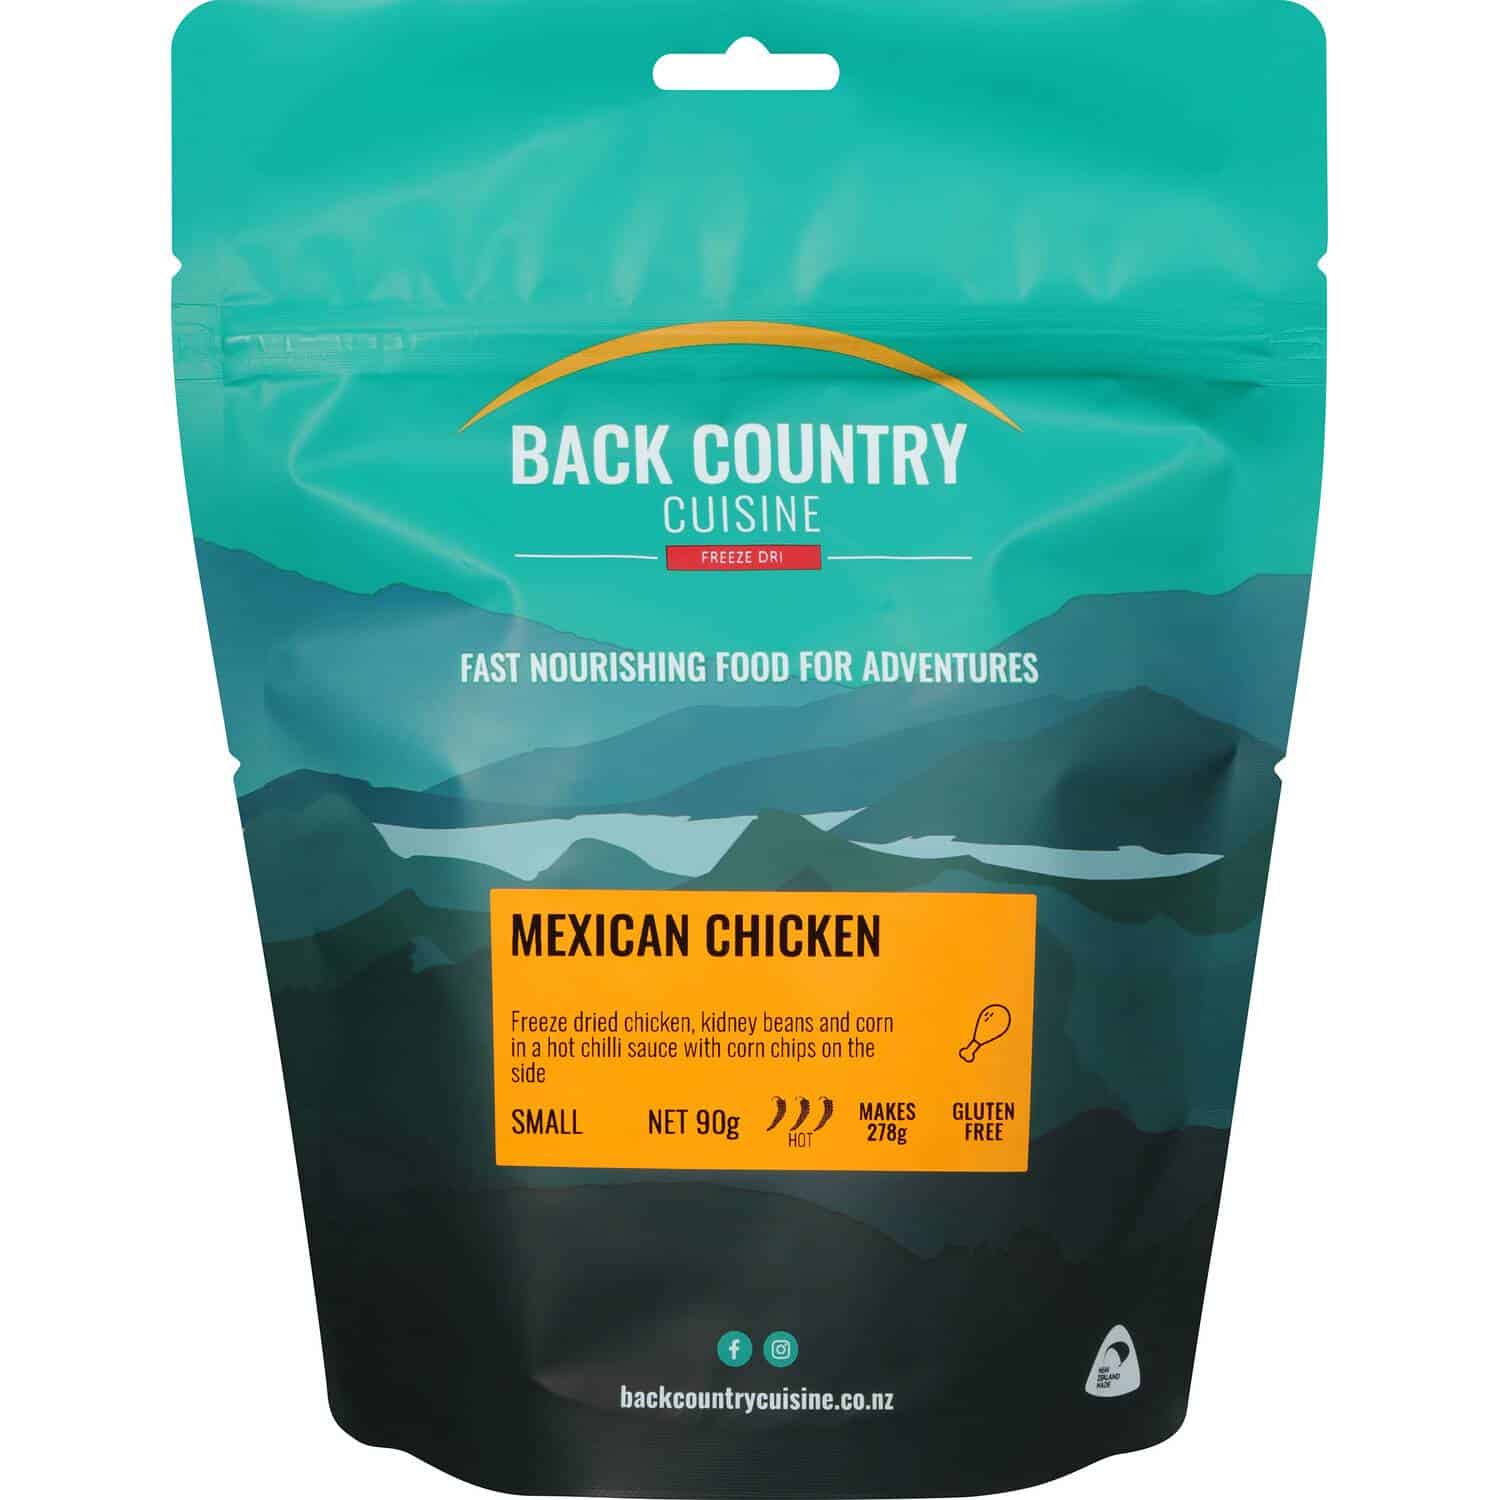 Back Country Cuisine Mexican Chicken Small - Tramping Food and Accessories sold by Venture Outdoors NZ